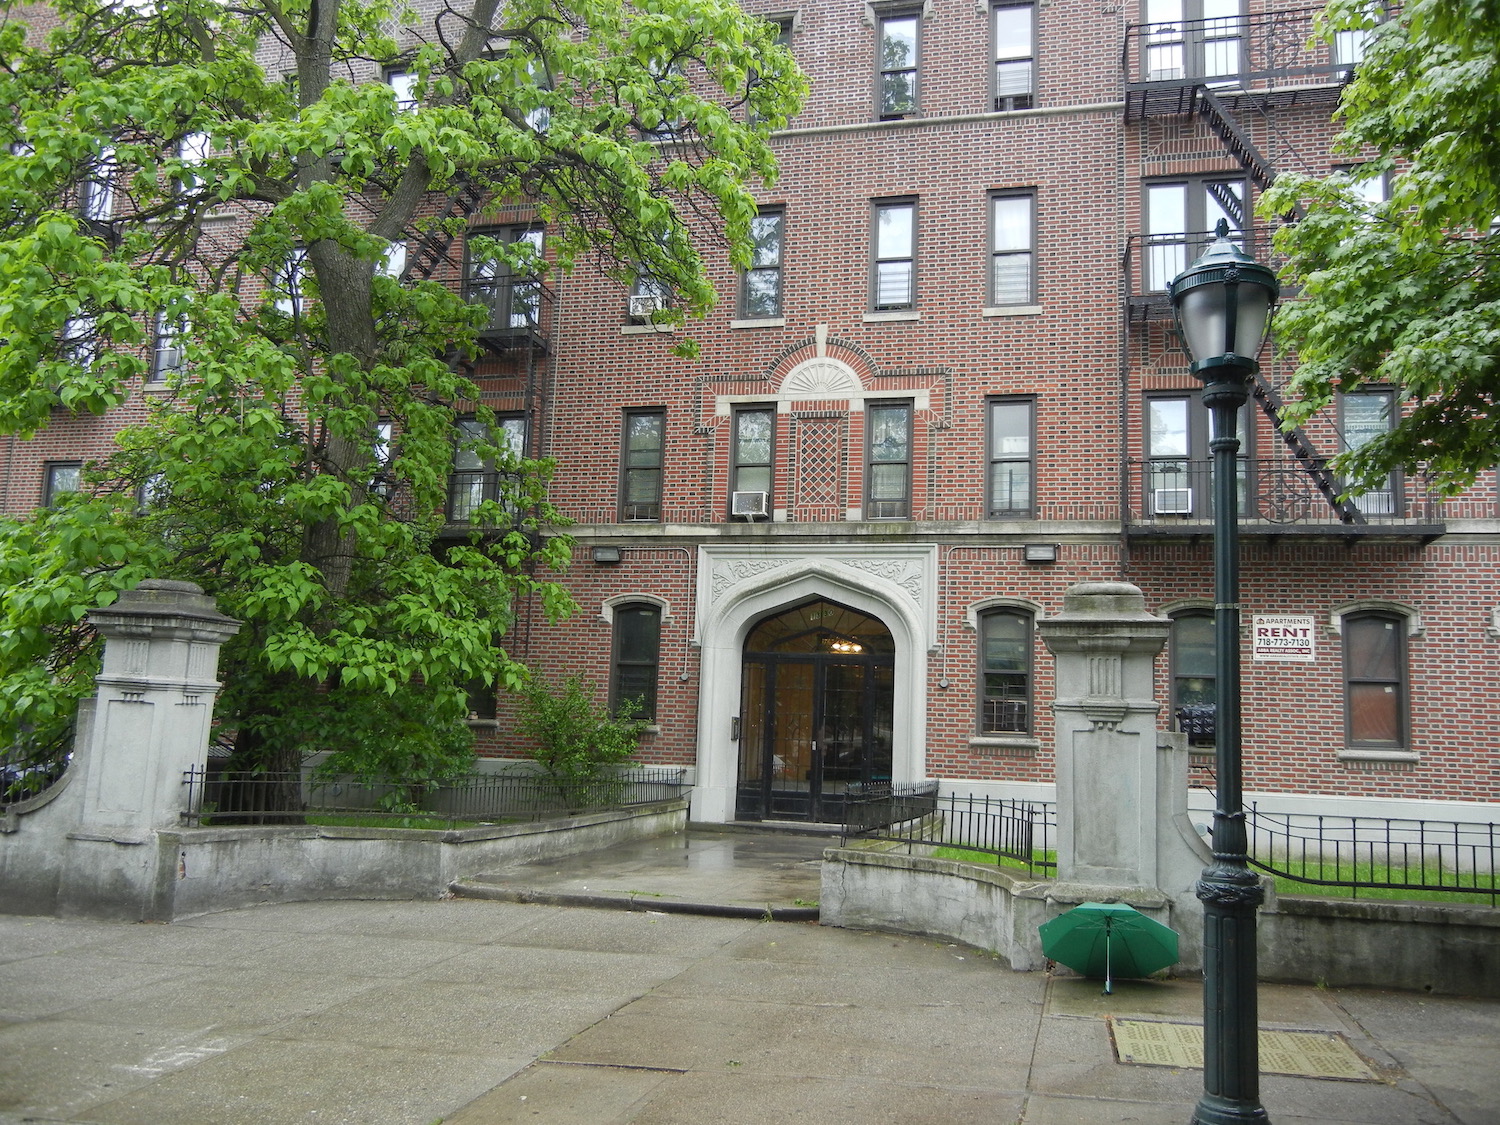 1330 Eastern Parkway, Brooklyn, home of Abr and Fannie Sheinaus, and birthplace of Ruthy Sheinaus